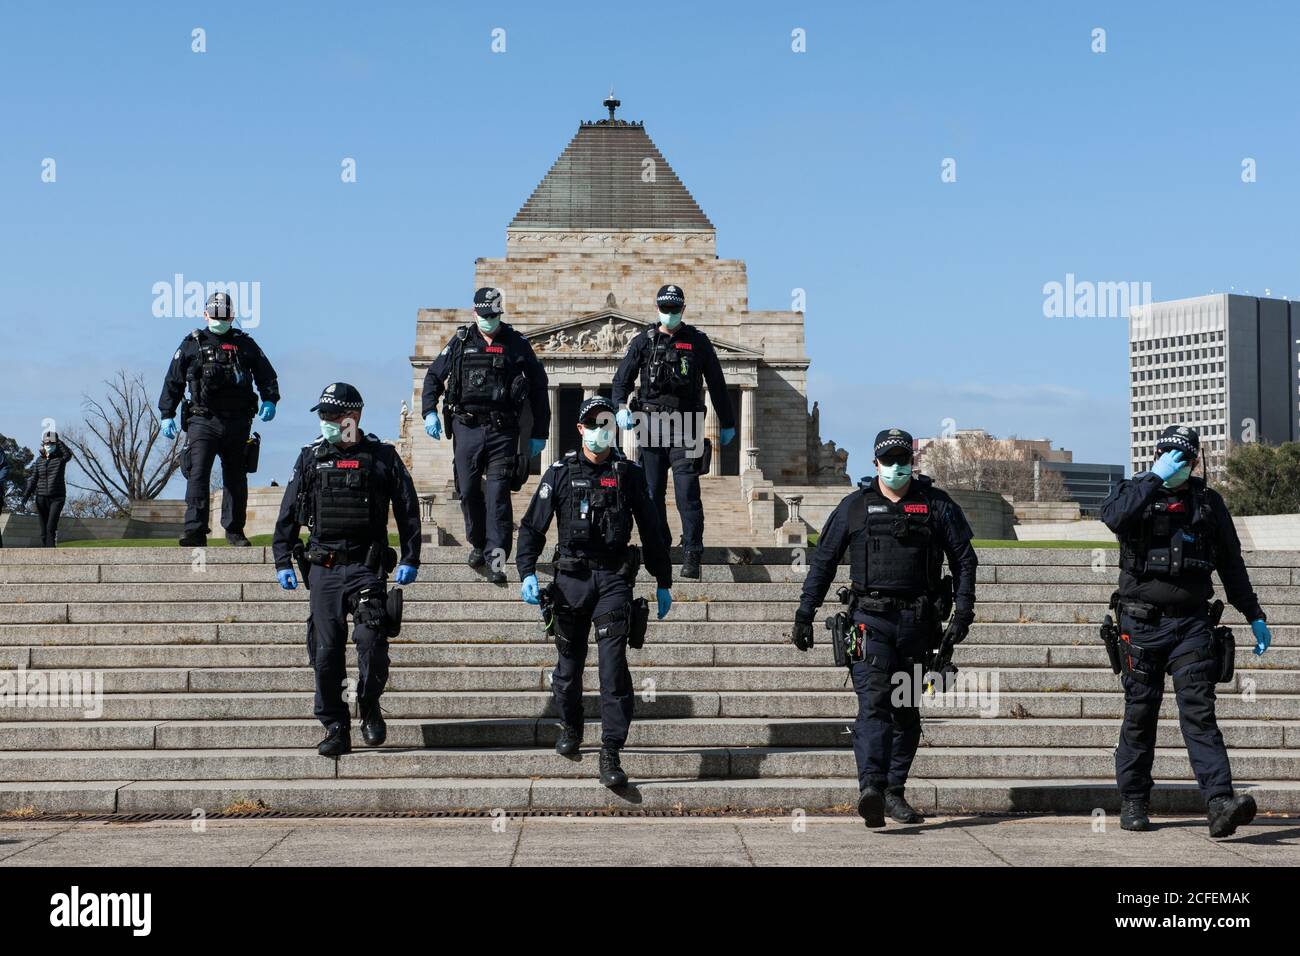 Melbourne, Australia 5 Sep 2020, Victorian Police Public Order Officers patrol the shrine forecourt before the Freedom Day Anti-mask and anti lockdown protest at the Shrine of Remembrance in Melbourne Australia. Credit: Michael Currie/Alamy Live News Stock Photo